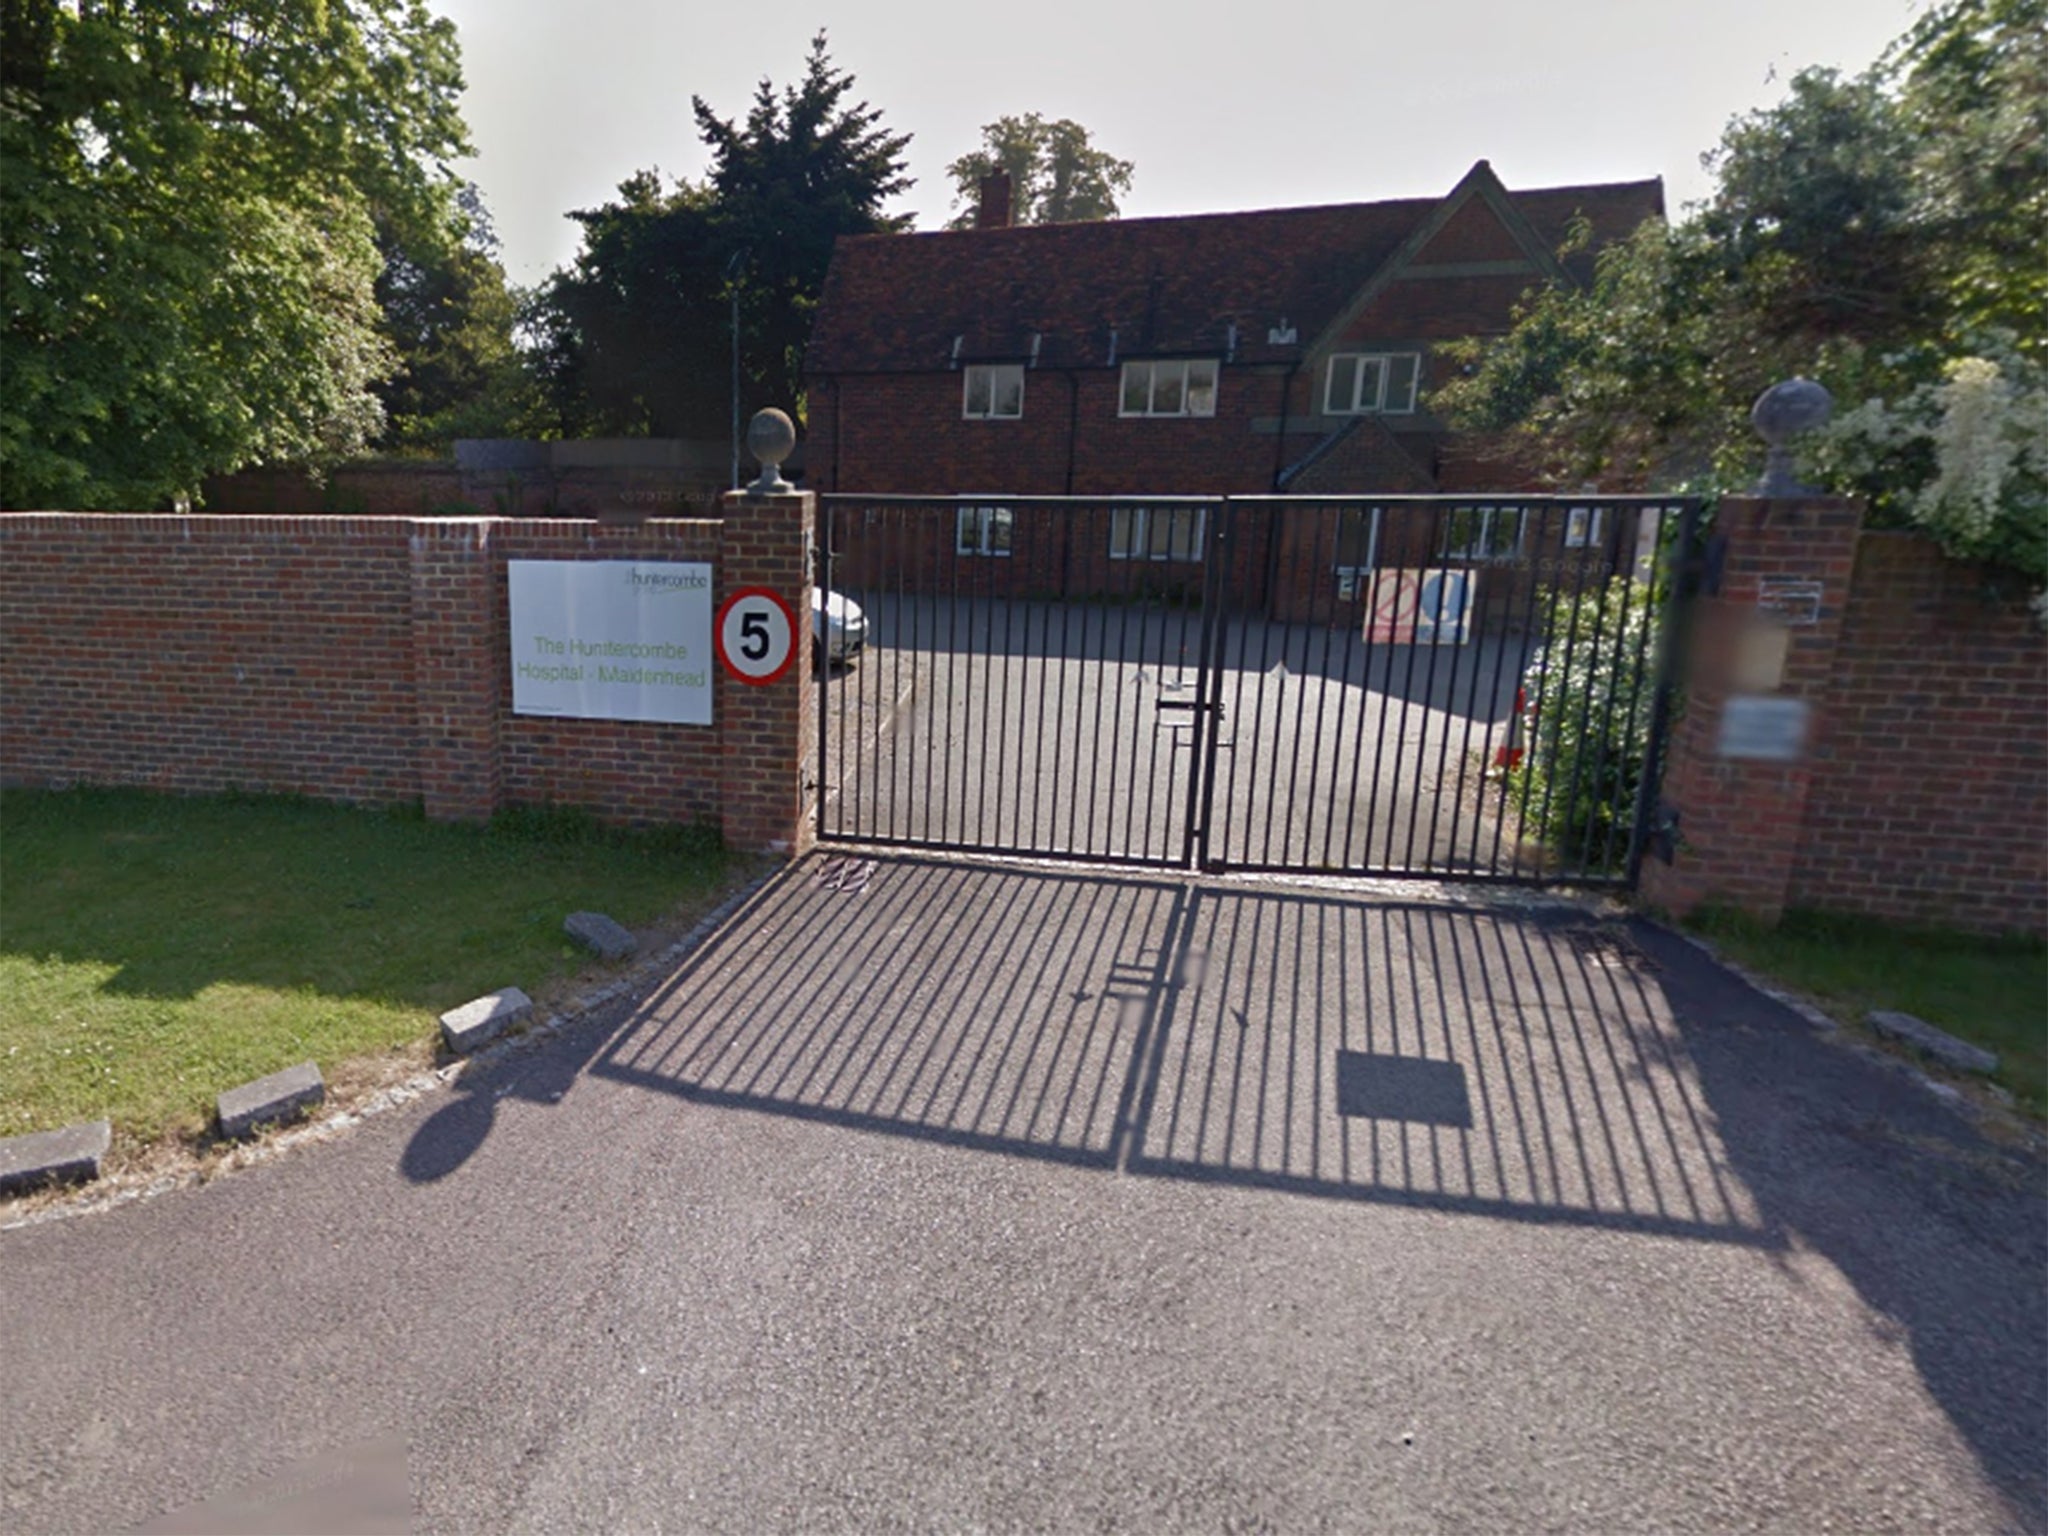 The Care Quality Commission rated Taplow Manor inadequate after The Independent revealed allegations of poor care